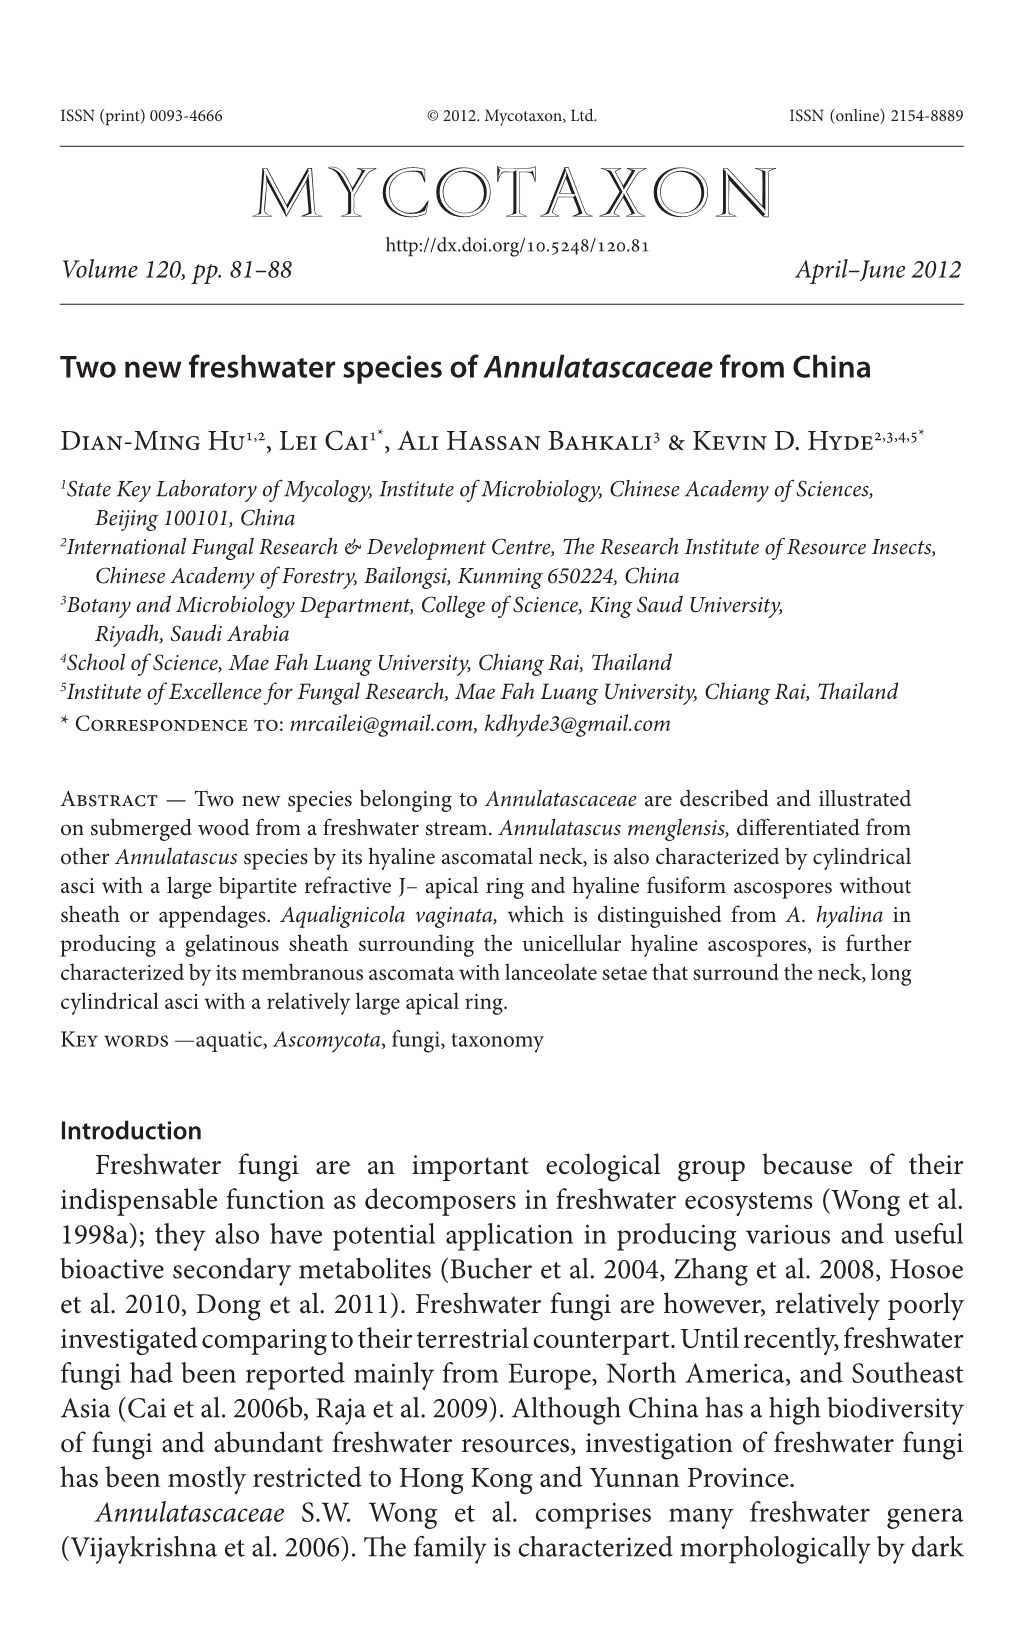 Two New Freshwater Species of &lt;I&gt;Annulatascaceae&lt;/I&gt; from China